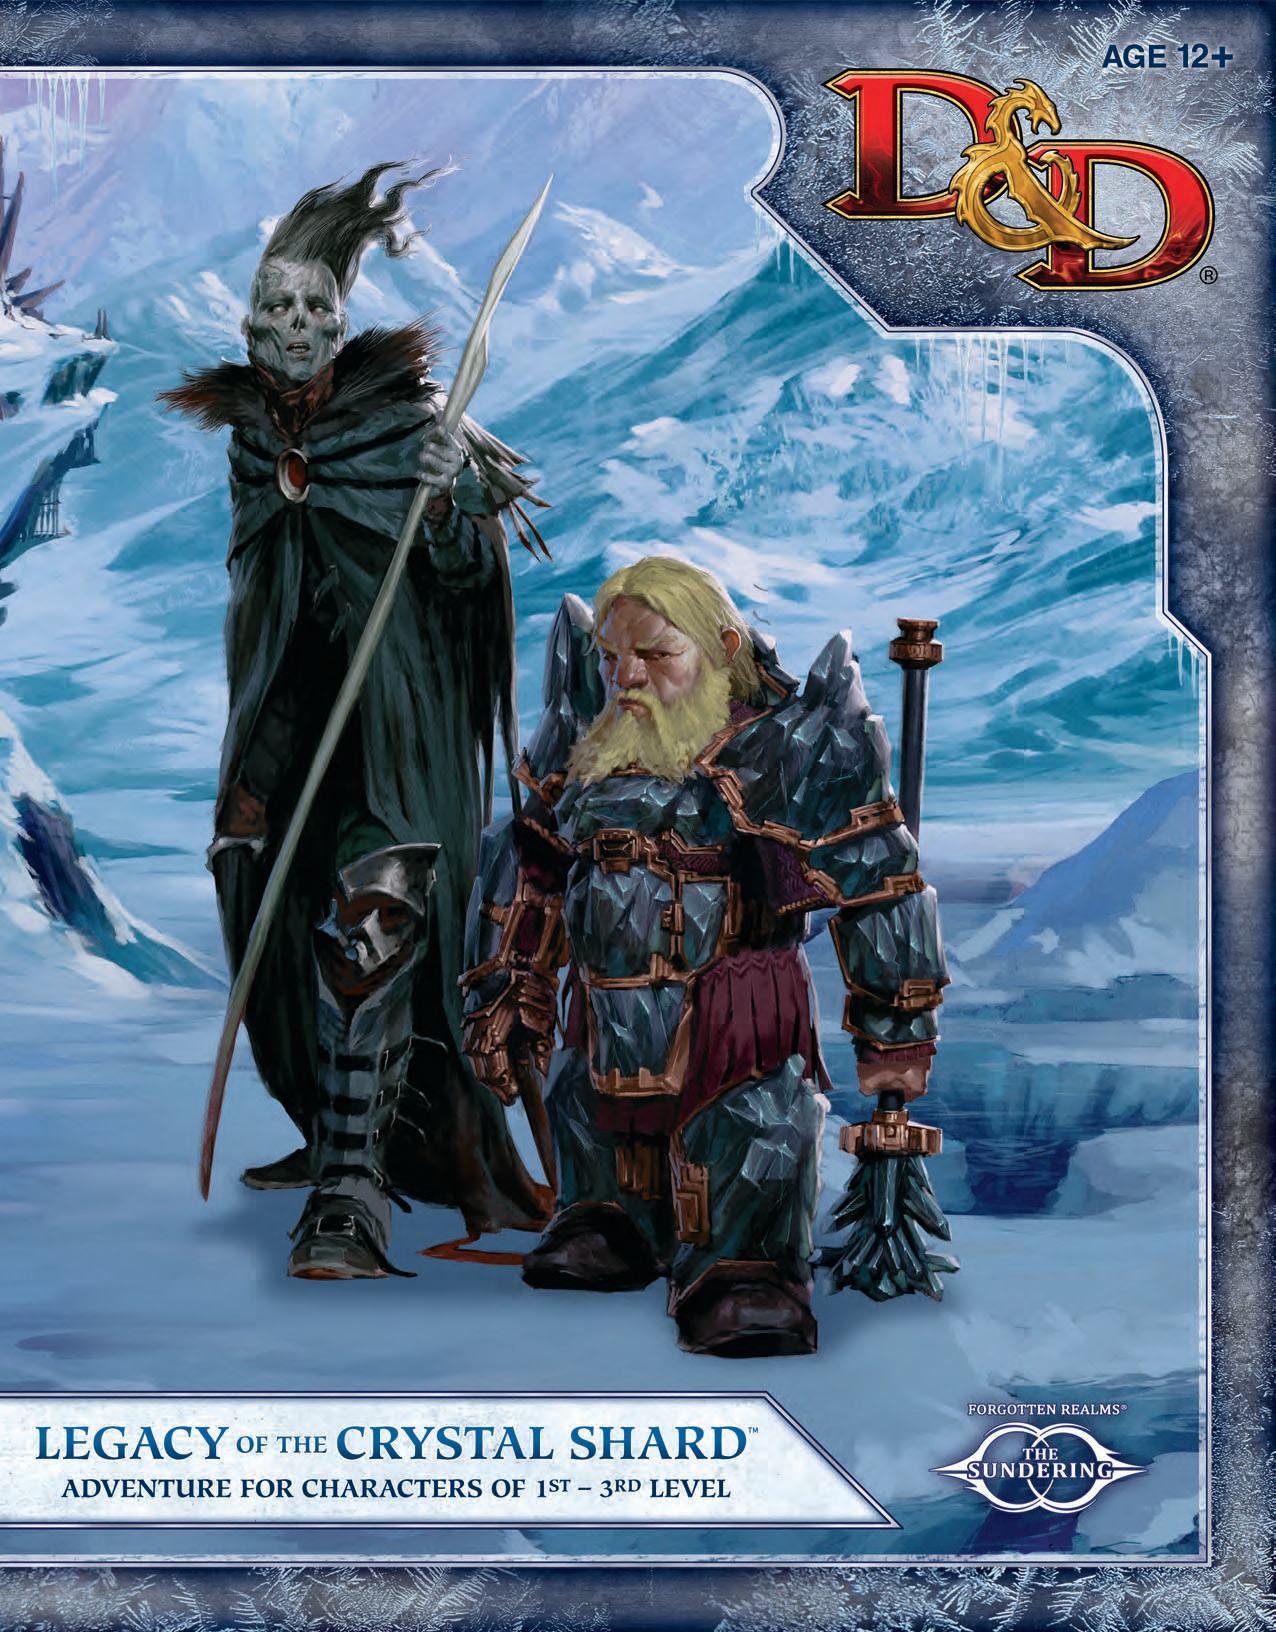 Legacy of the Crystal Shard - R.A. Salvatore, et. al.